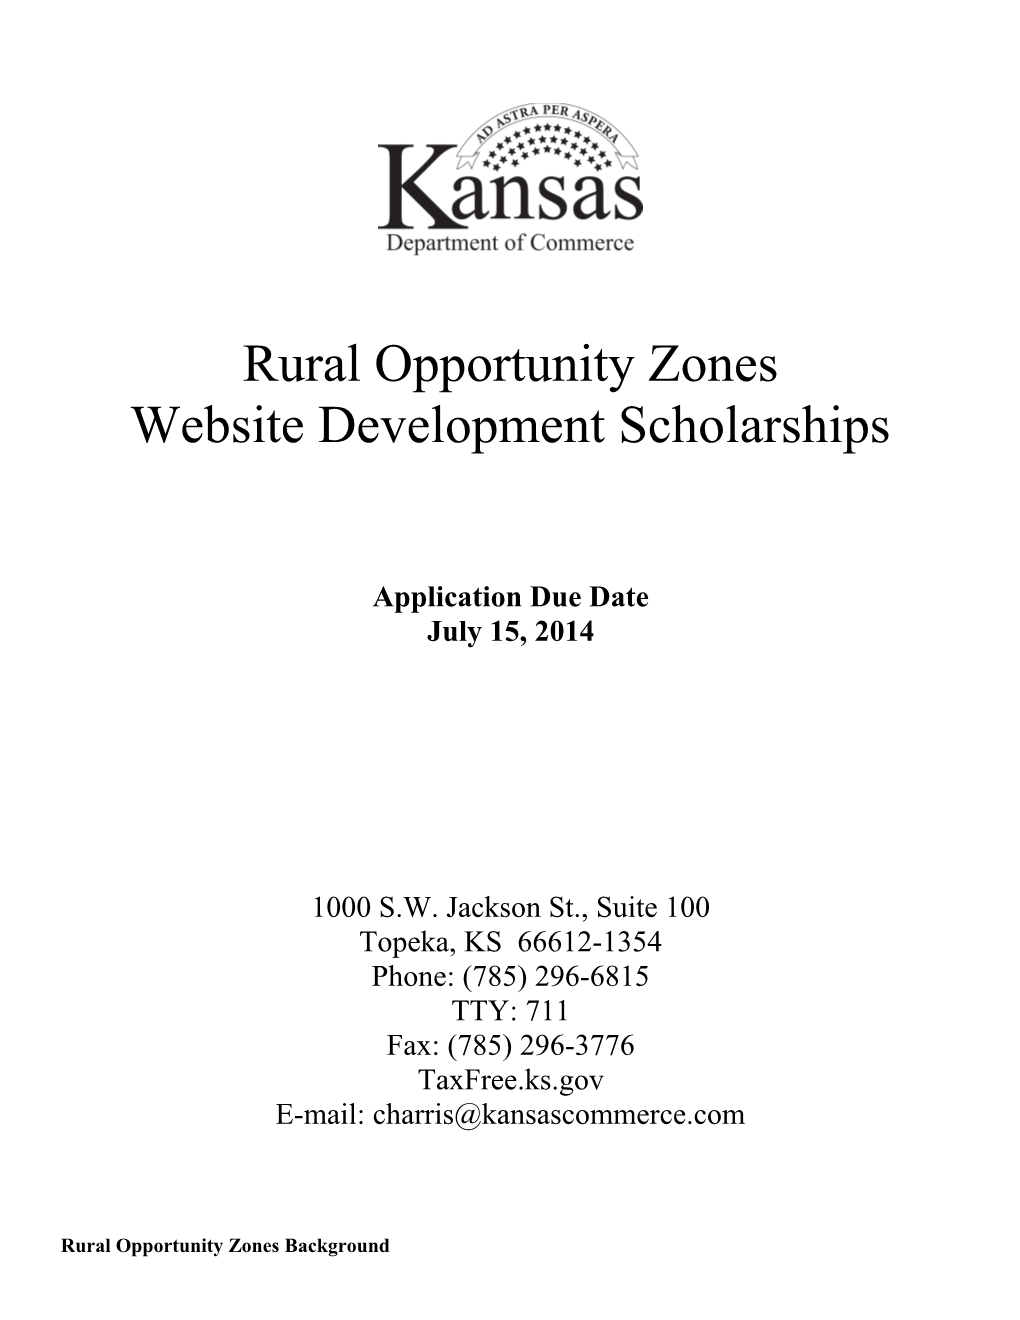 Rural Opportunity Zones Background